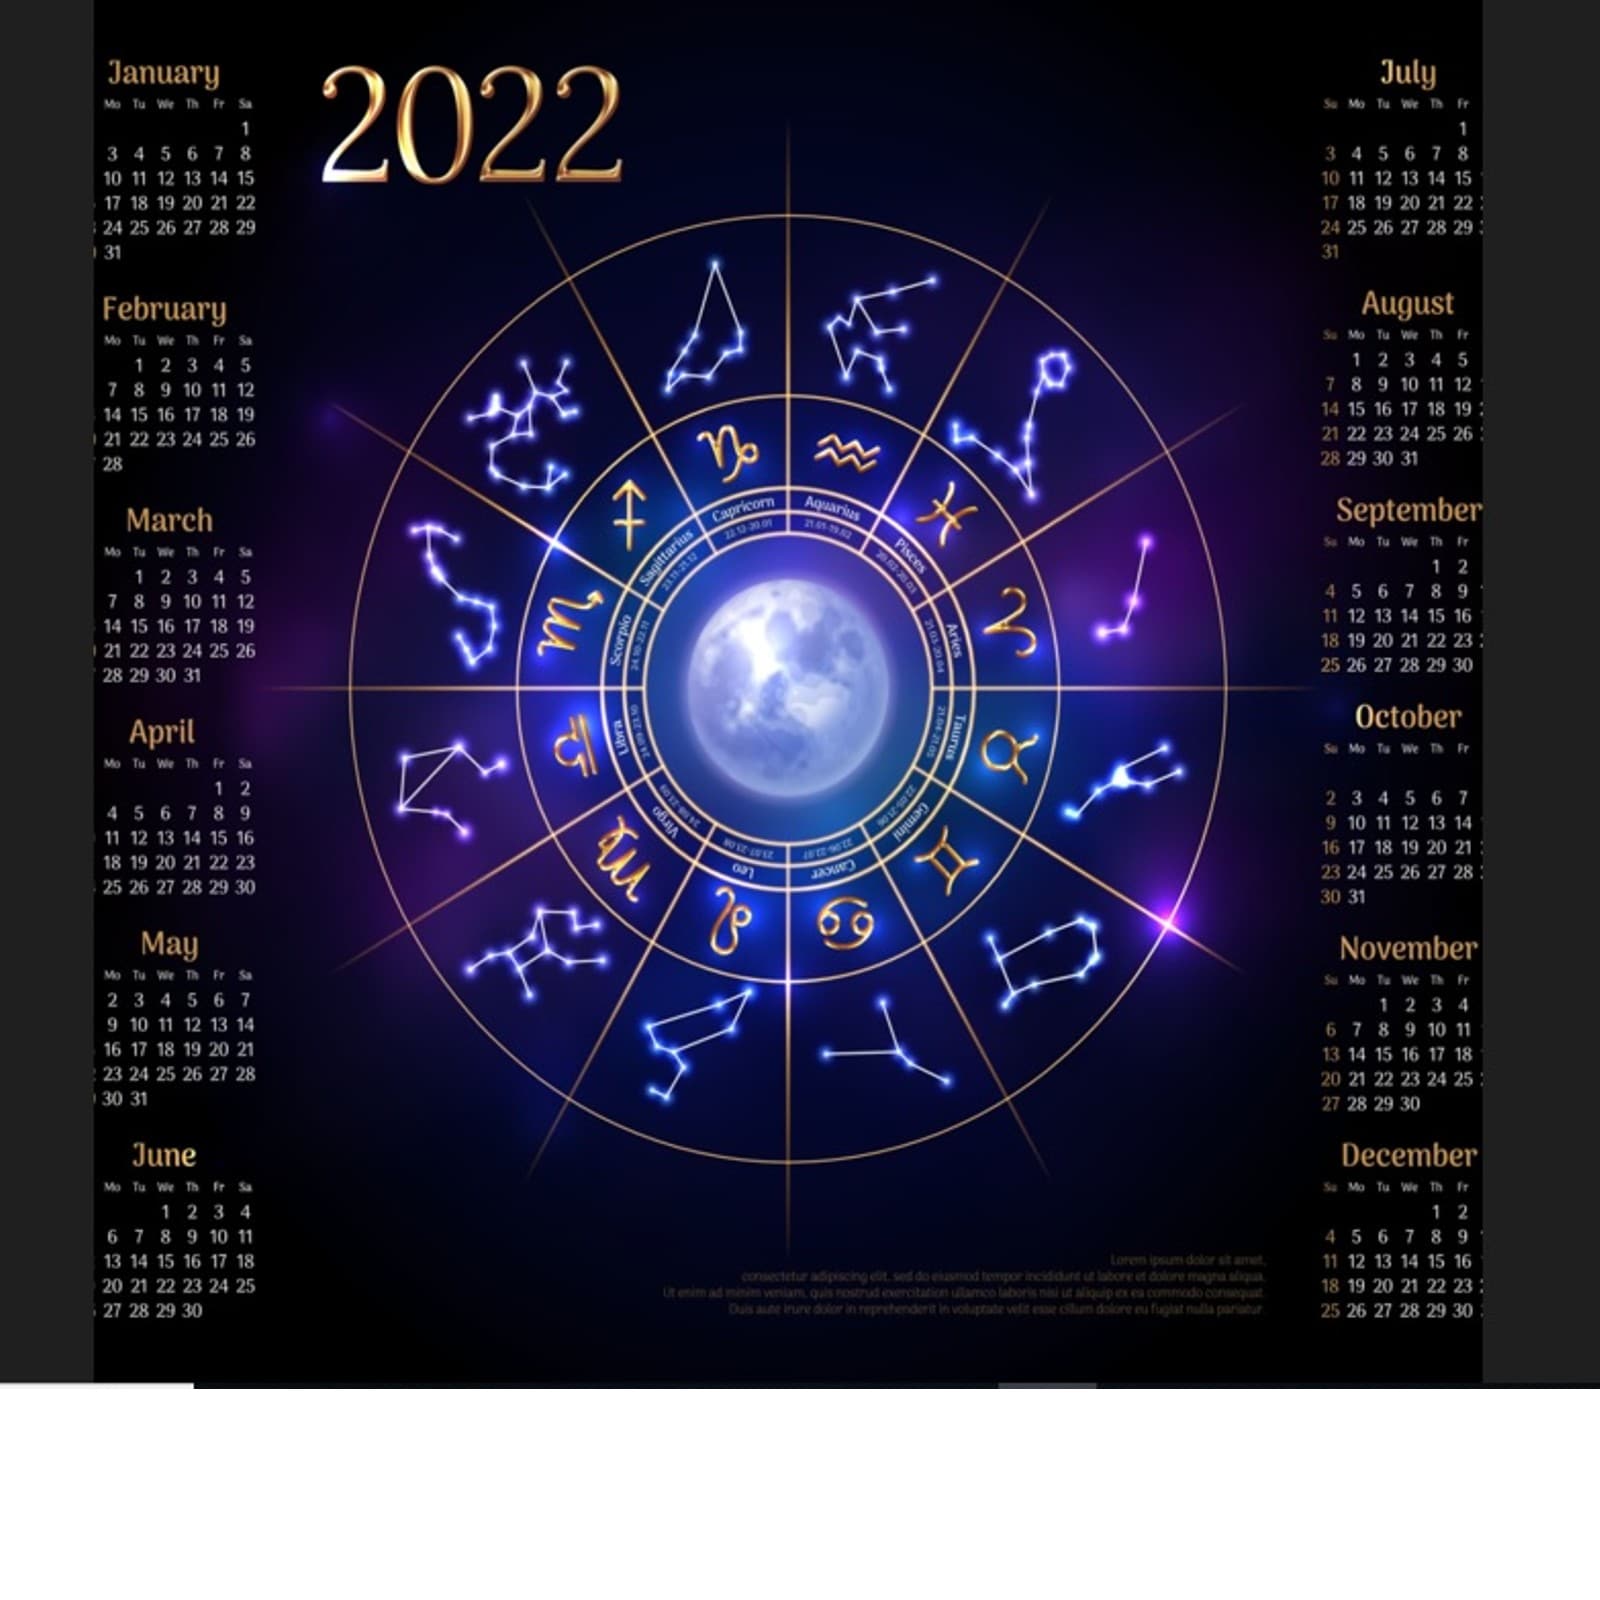 Horoscope Today September 7 22 Check Out Daily Astrological Prediction For Aries Taurus Libra Sagittarius And Other Zodiac Signs For Wednesday